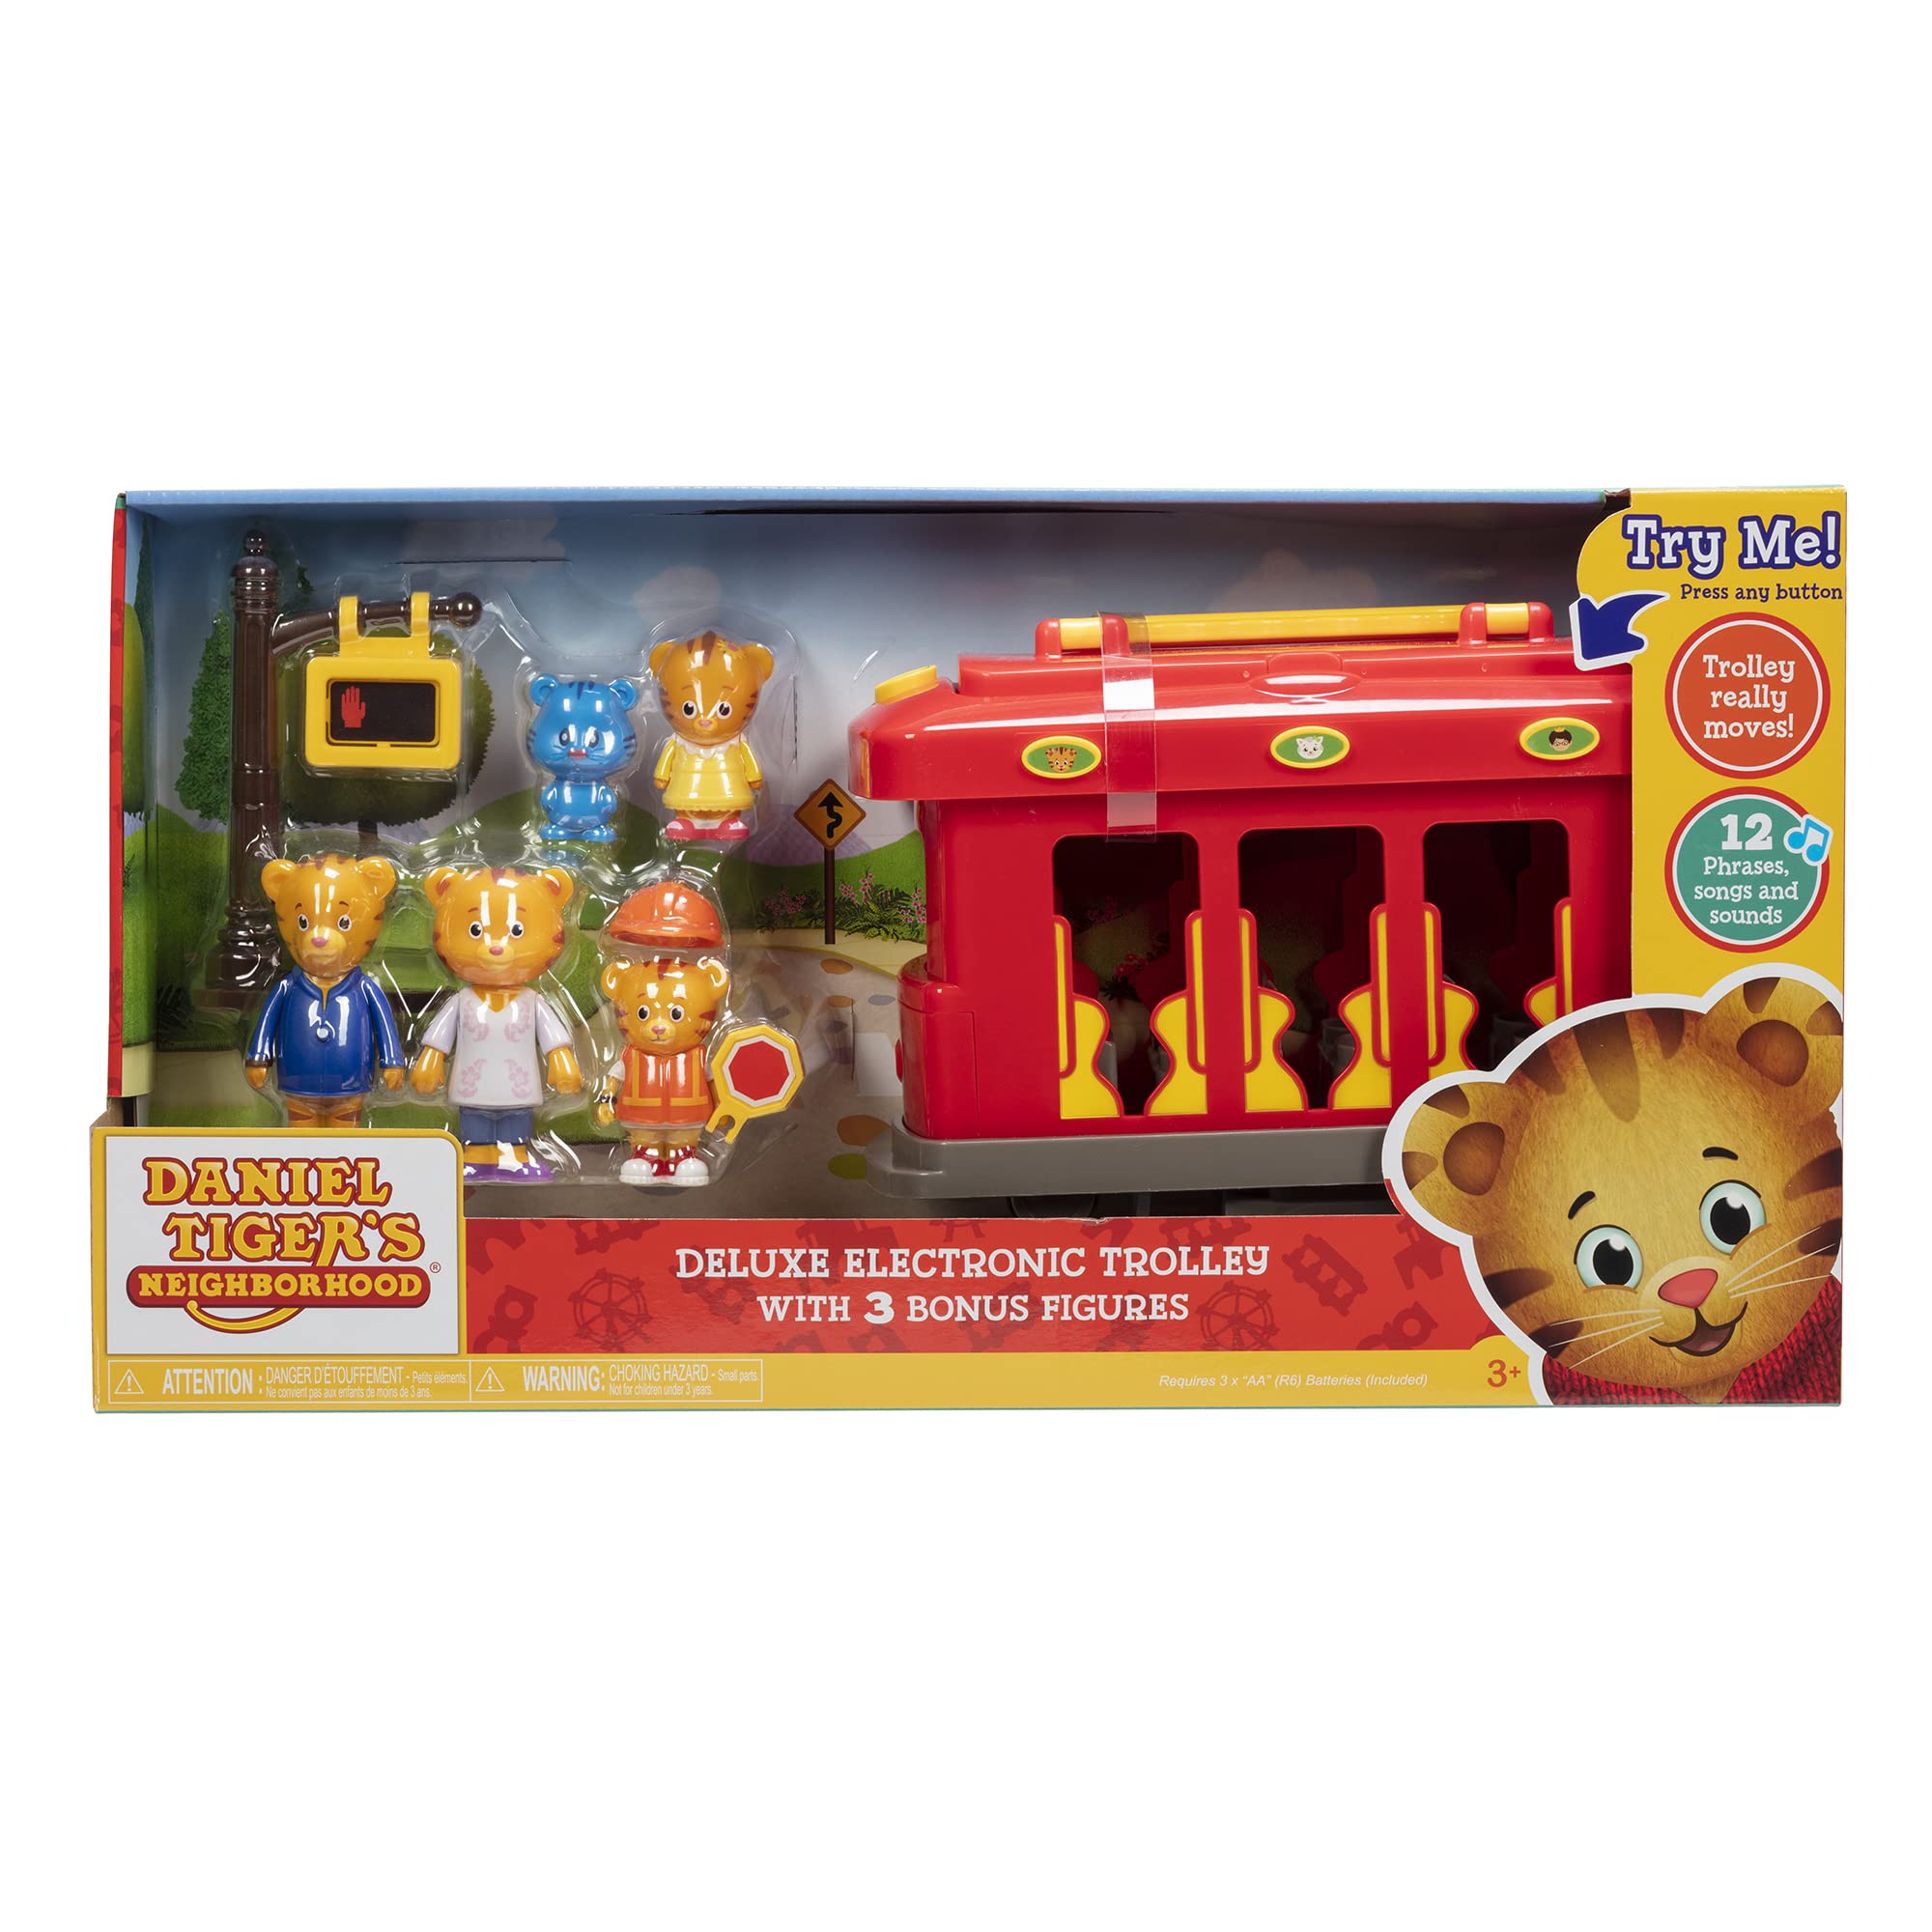 Daniel Tiger's Neighborhood Deluxe Electronic Trolley Includes 5 Family Figures with Lights, Sounds, Music & Crosswalk Accessories! [Amazon Exclusive]